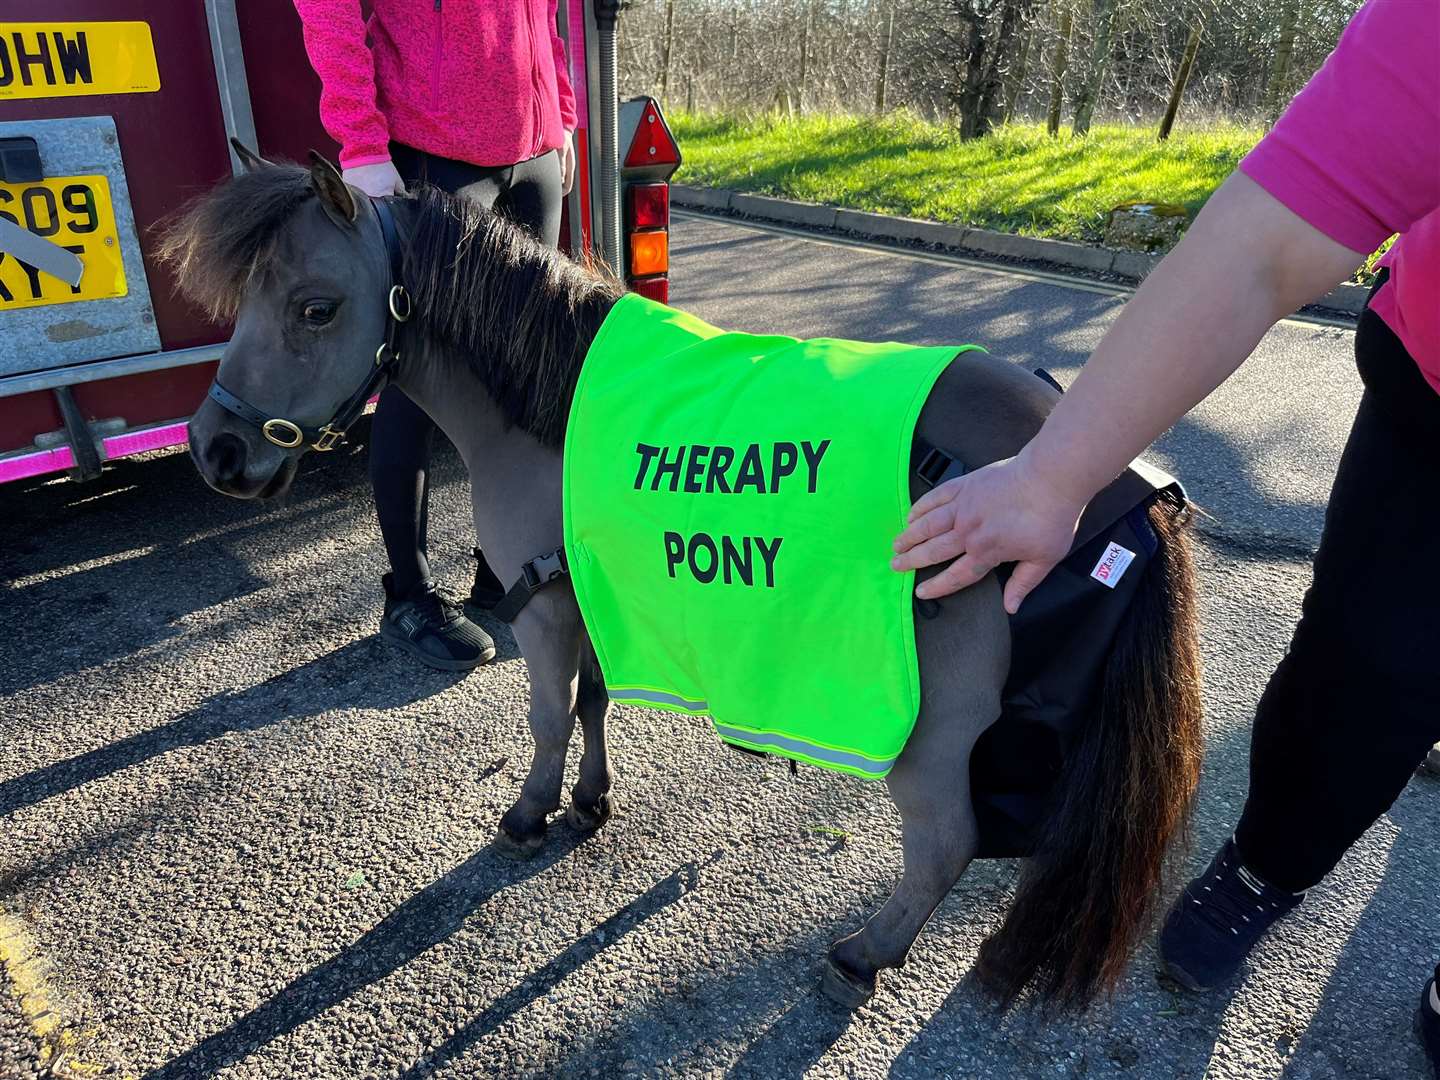 George the therapy pony